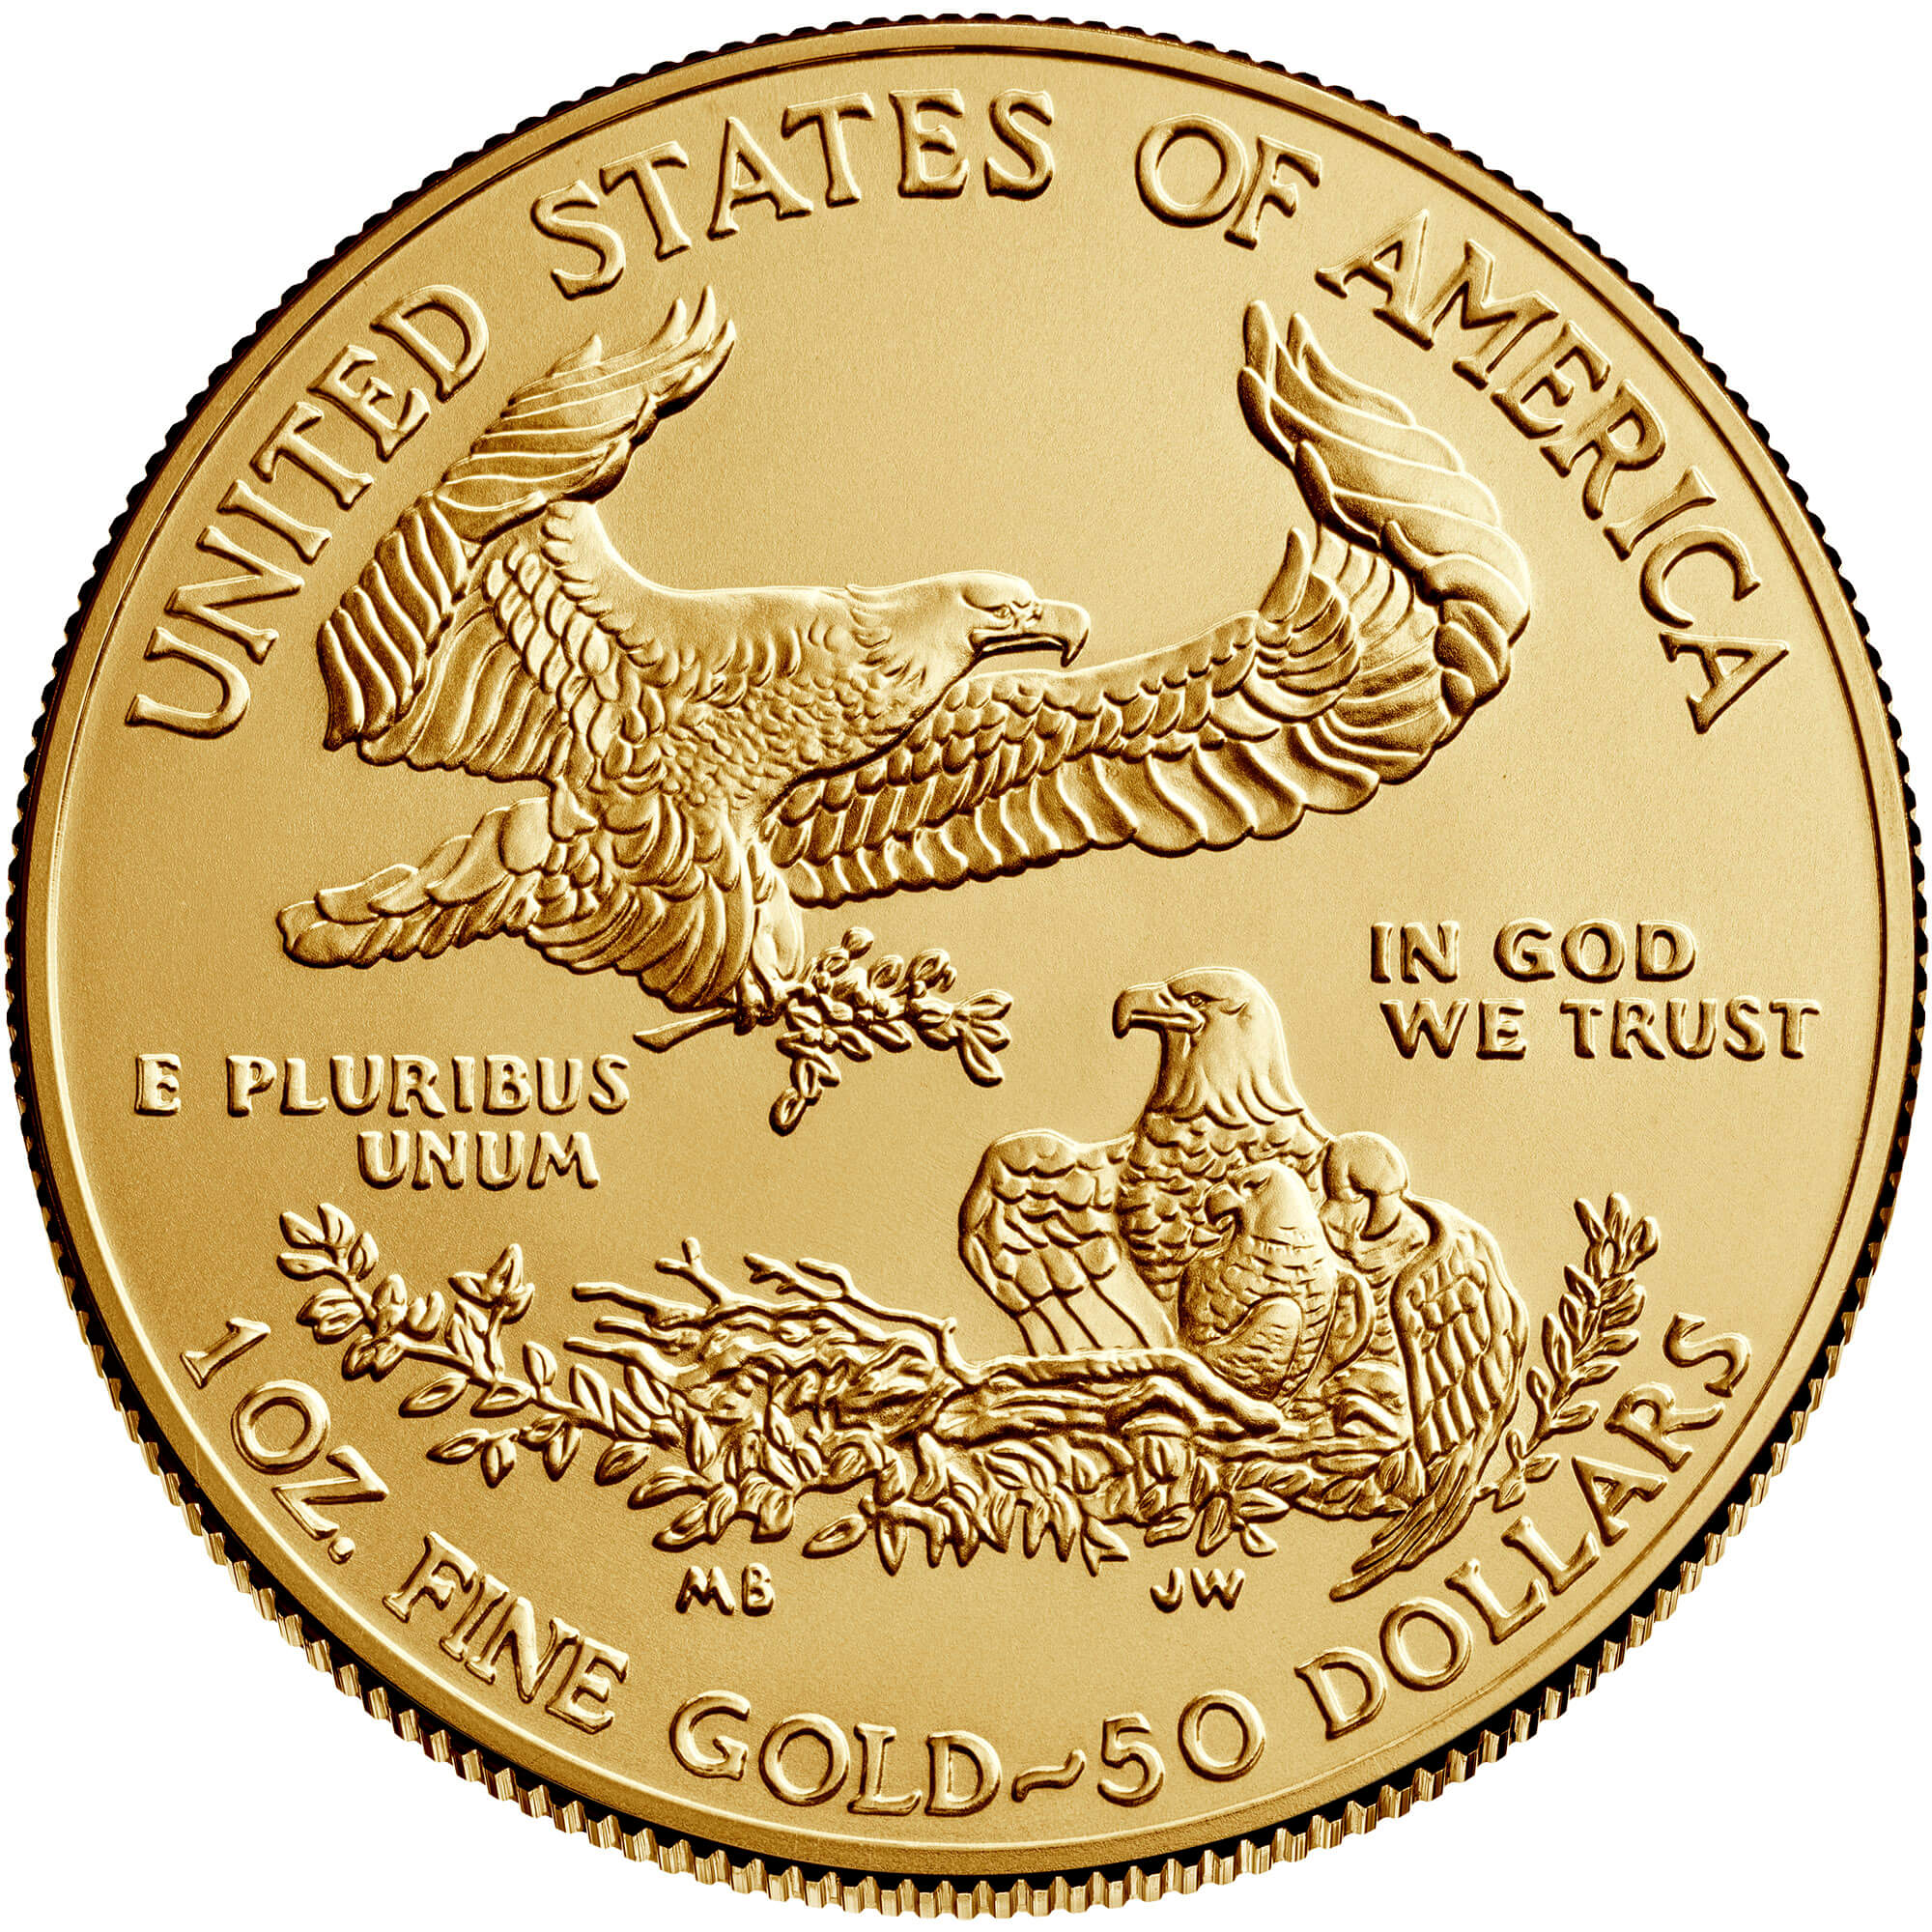 1pcs 2011 1oz  fine gold-50 dollars liberty coin double eagle gold plated cBLCA 